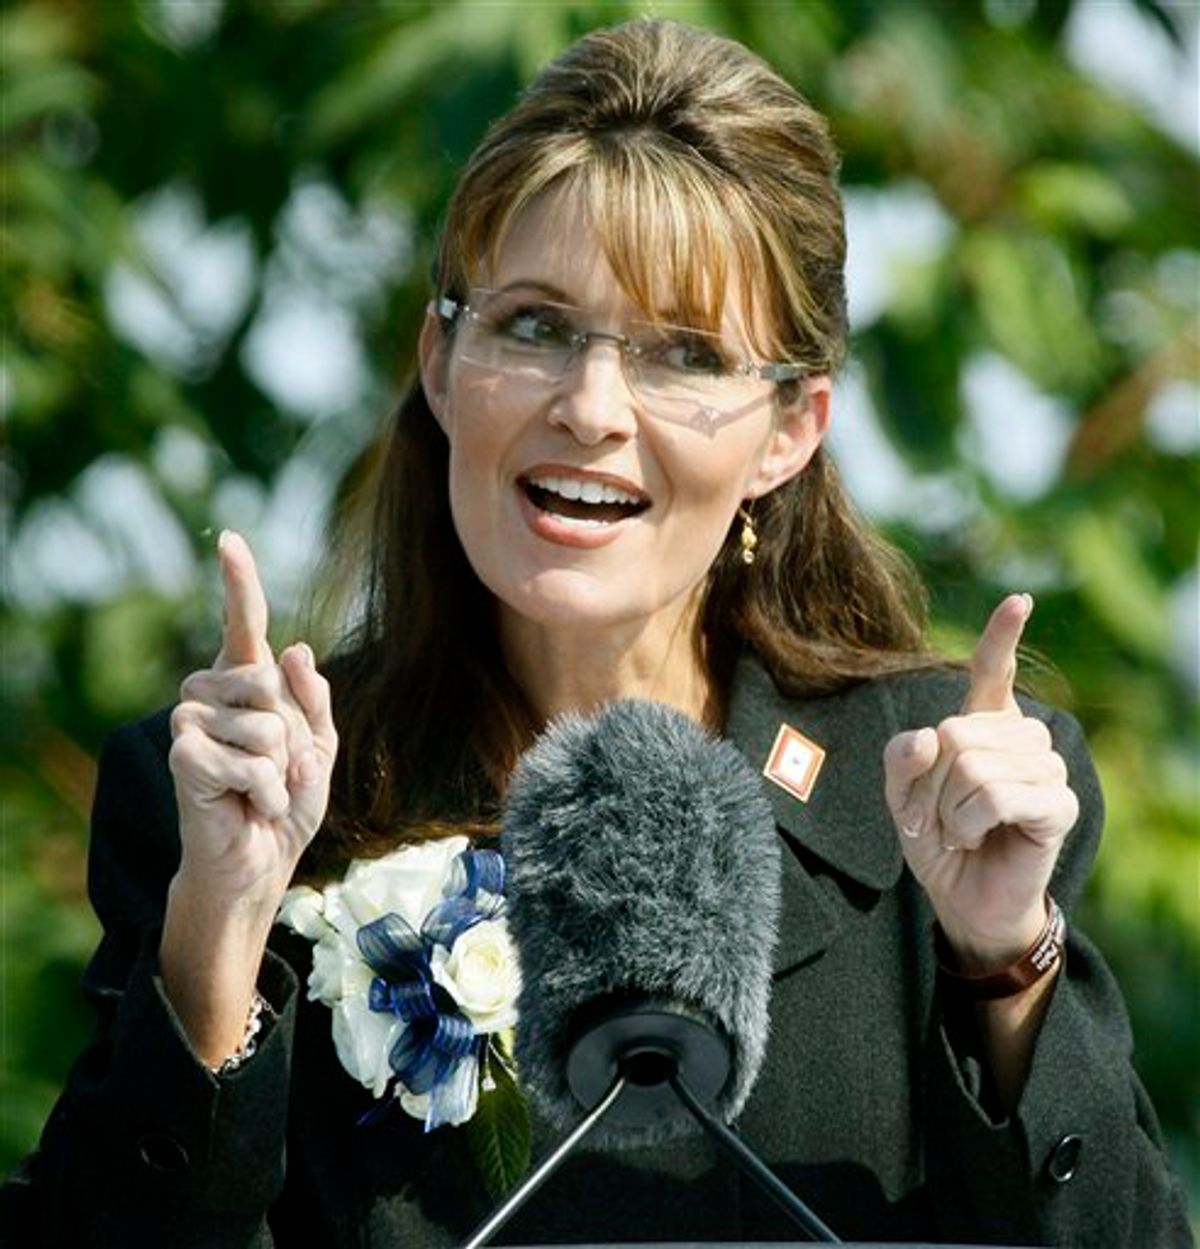 FILE - In this July 26, 2009 file photo shows Alaska Gov. Sarah Palin gestures while giving her resignation speech in Fairbanks, Alaska. A year after her abrupt resignation as Alaska governor, Palin has evolved into a political personality writ large, commanding weeks of headlines for a single Facebook observation _ see health care "death panels" _ and six-figure speaking fees from groups clamoring for her words. Going rogue with a best-selling memoir only added to her aura among the conservative faithful and she has easily eclipsed other Republicans as the coveted endorsement this election year.  (AP Photo/Al Grillo, file ) (AP)